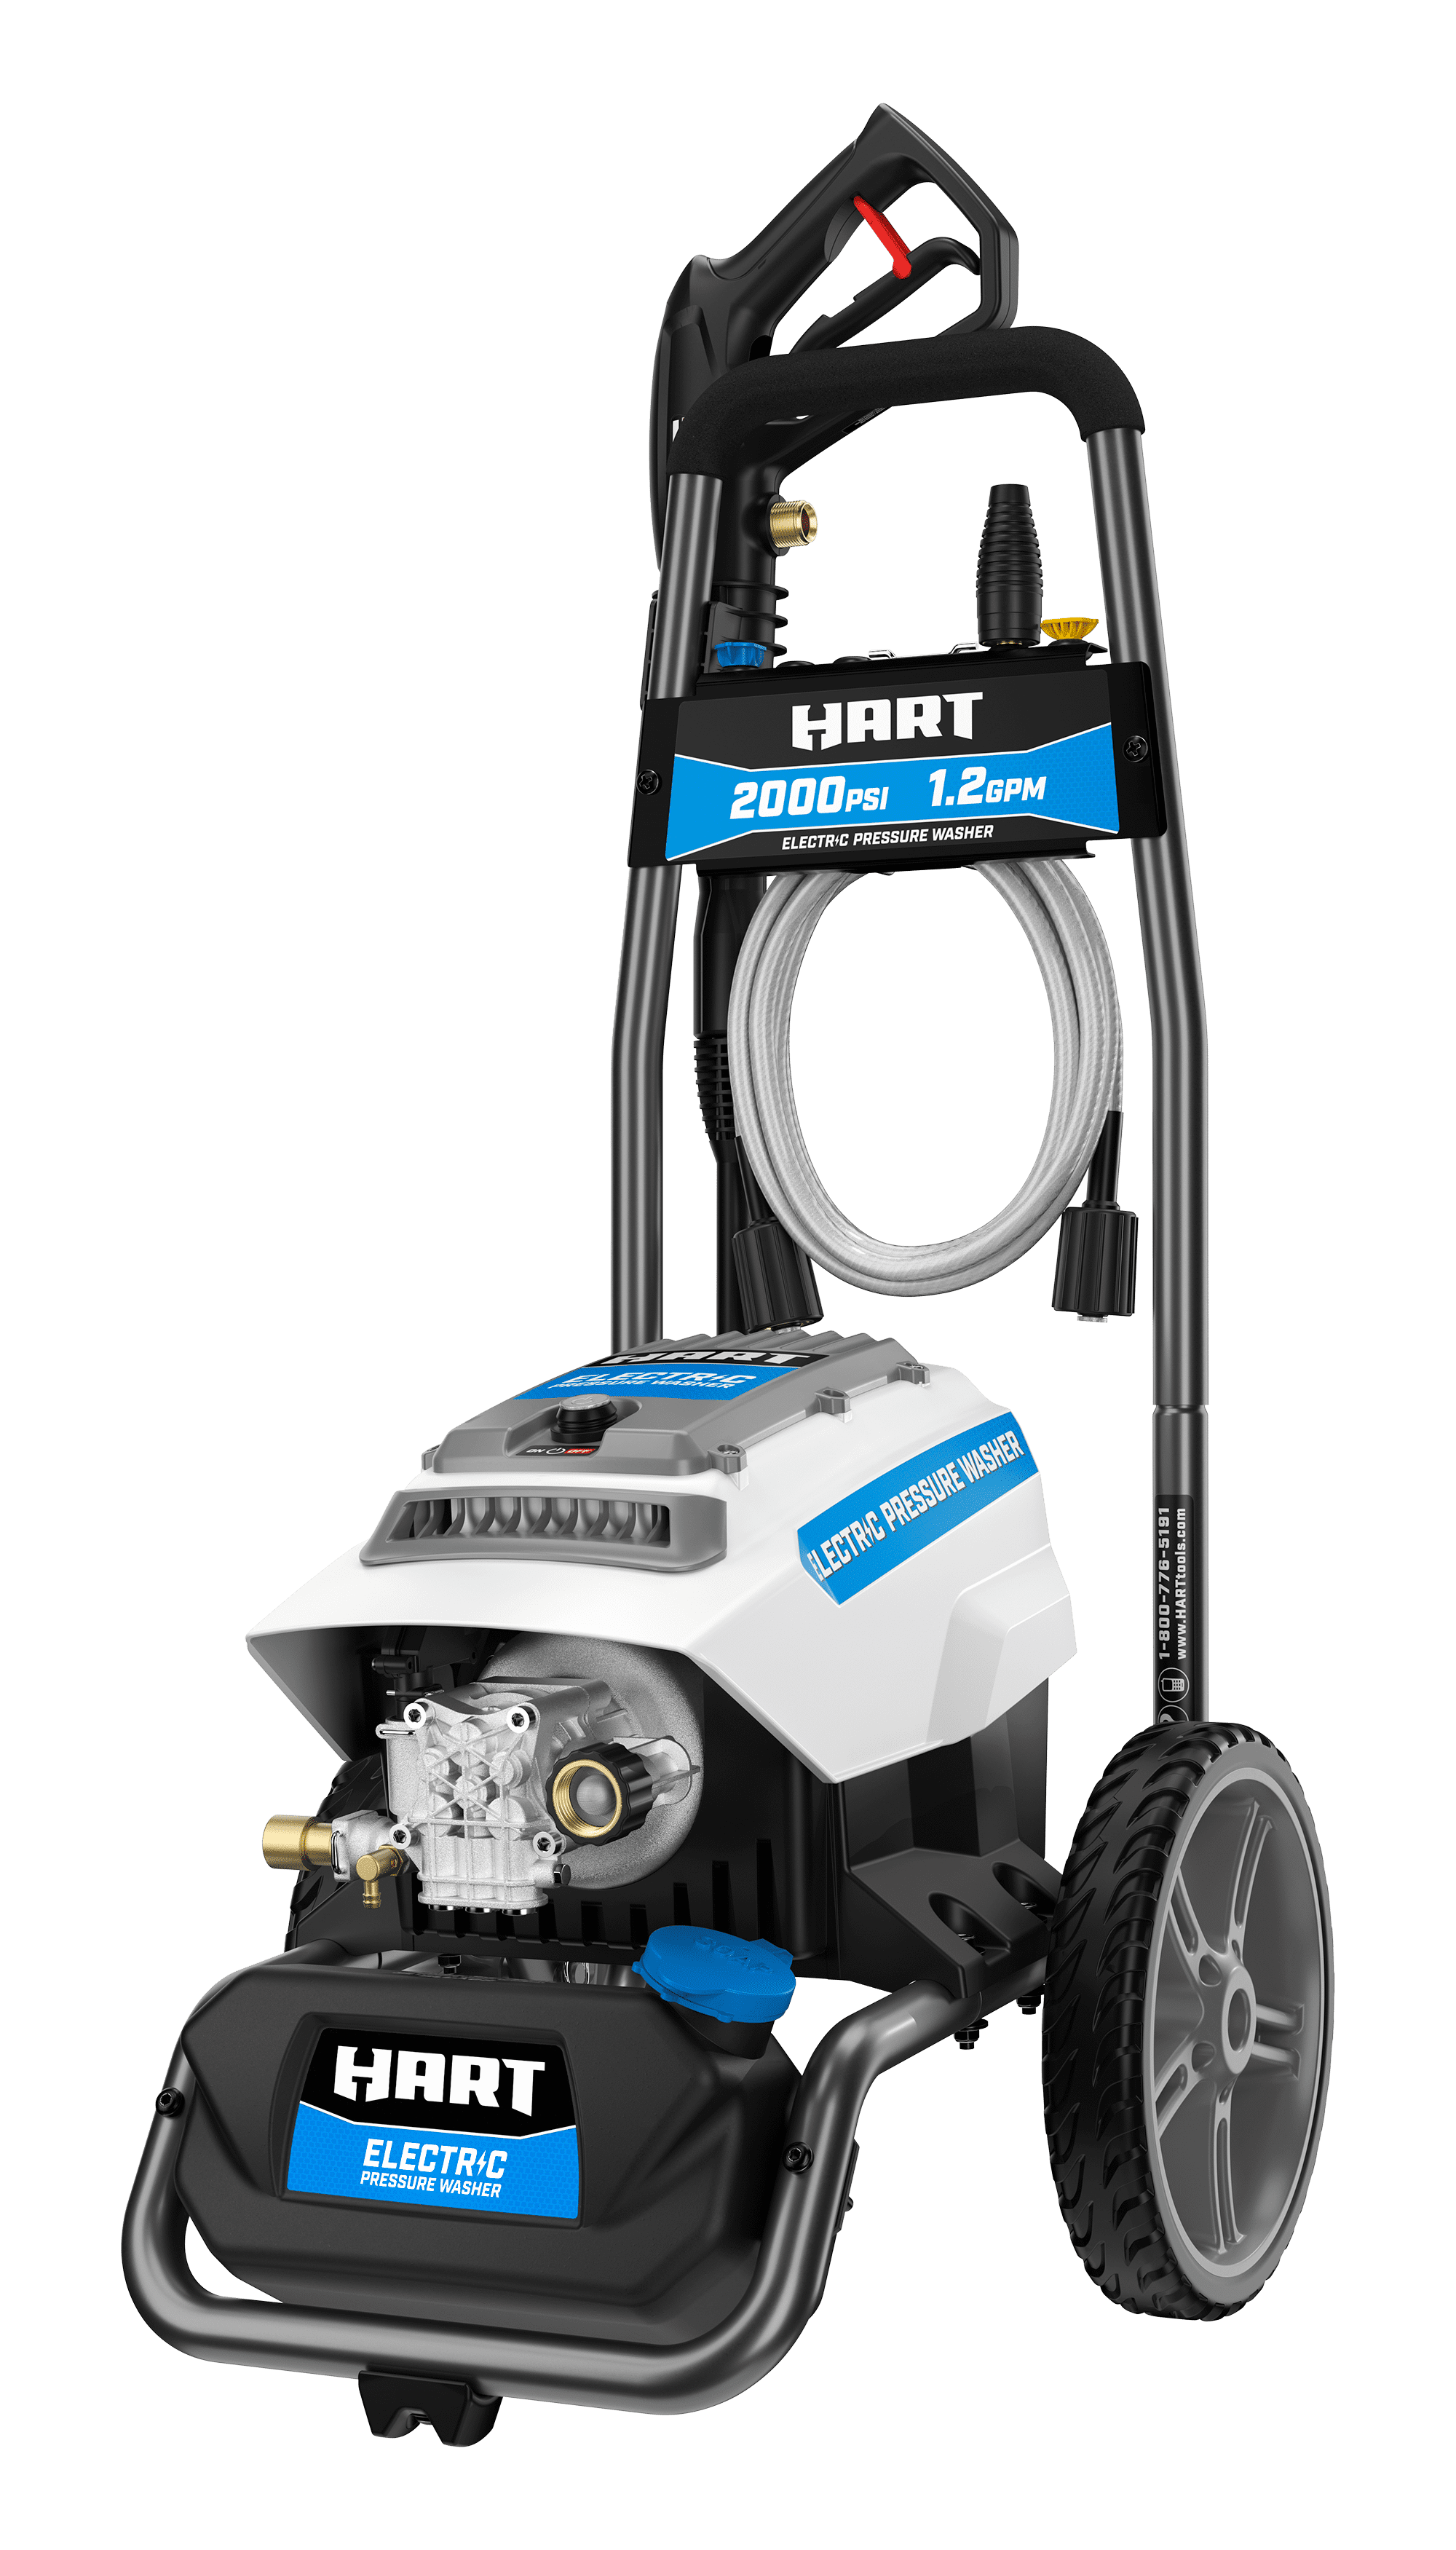 FATFOX Electric High Pressure Washer 3500 Psi and 2.5 GPM with 25ft  Hose/16ft Power Cord,Making It Perfect for Cleaning Cars, Fences, Pool,  Patios. 